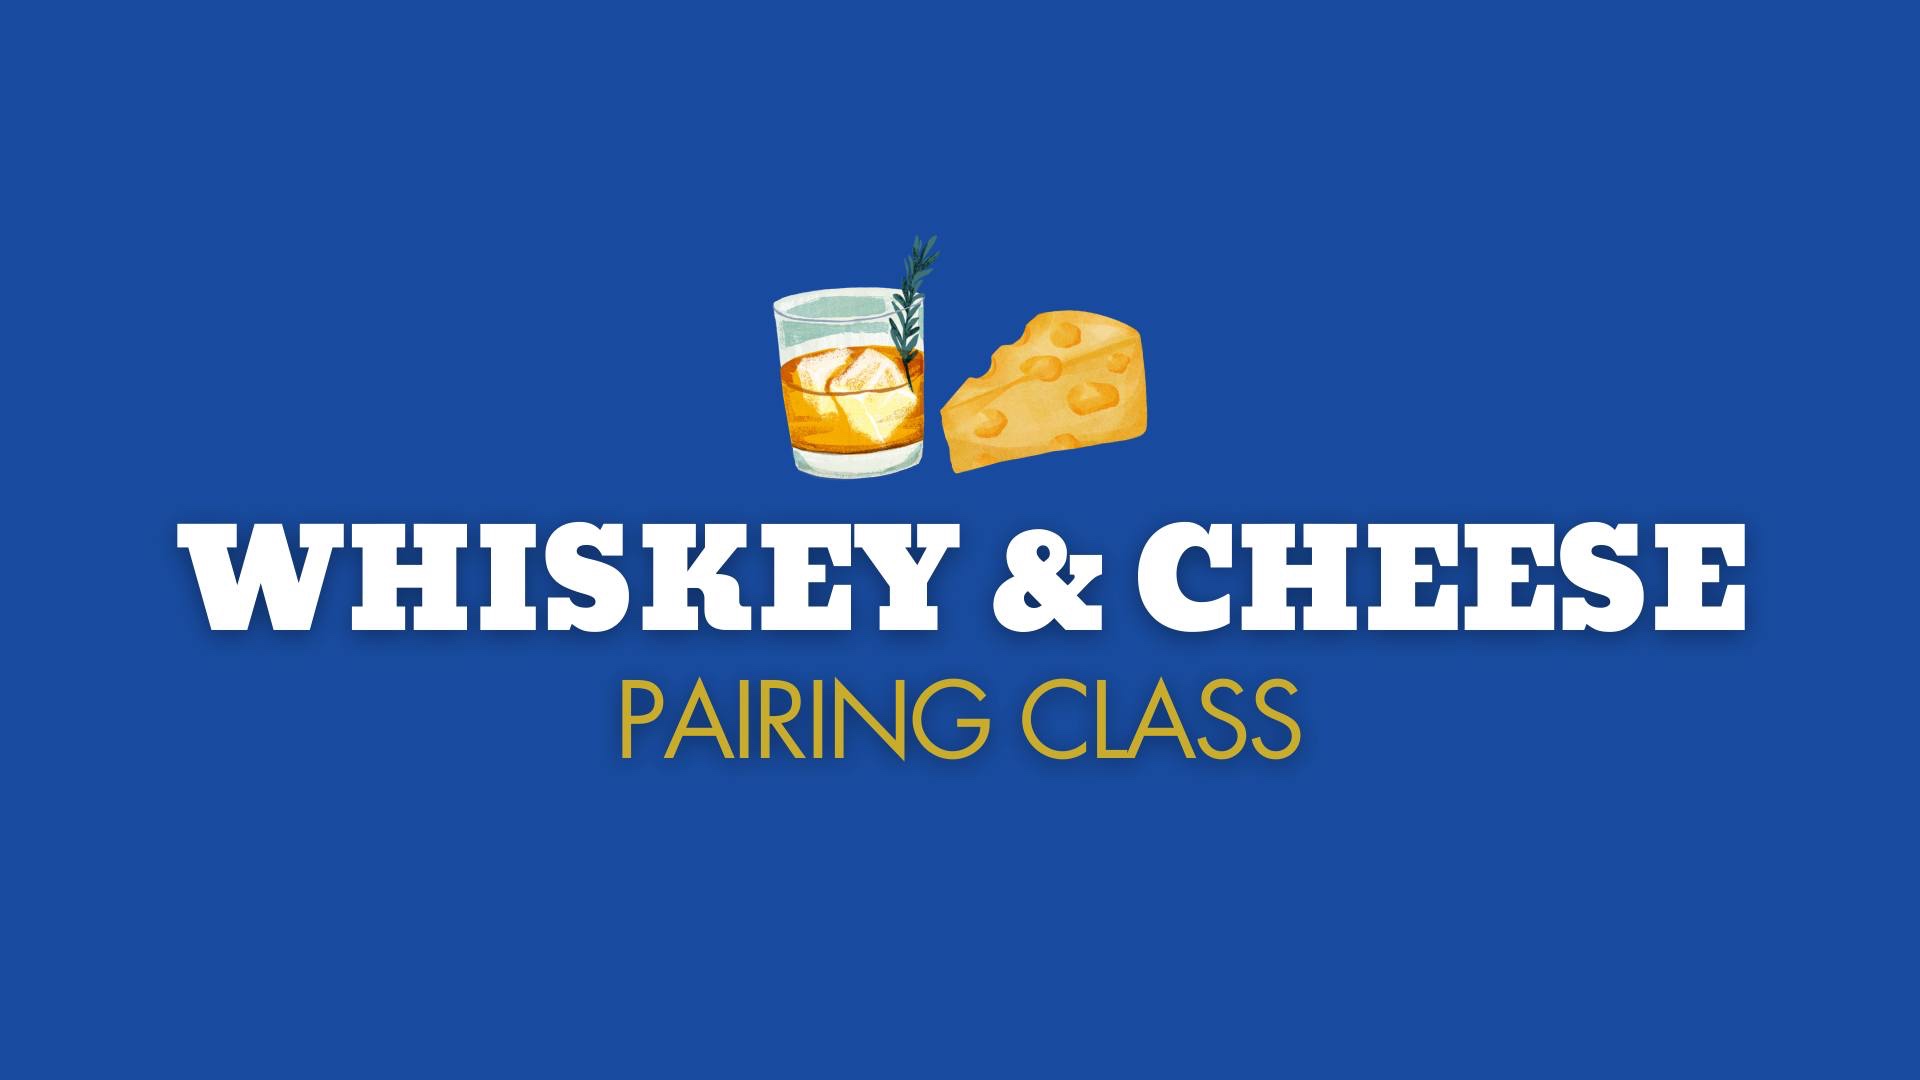 Whiskey and Cheese Pairing Class at The Skylight Franklin, TN